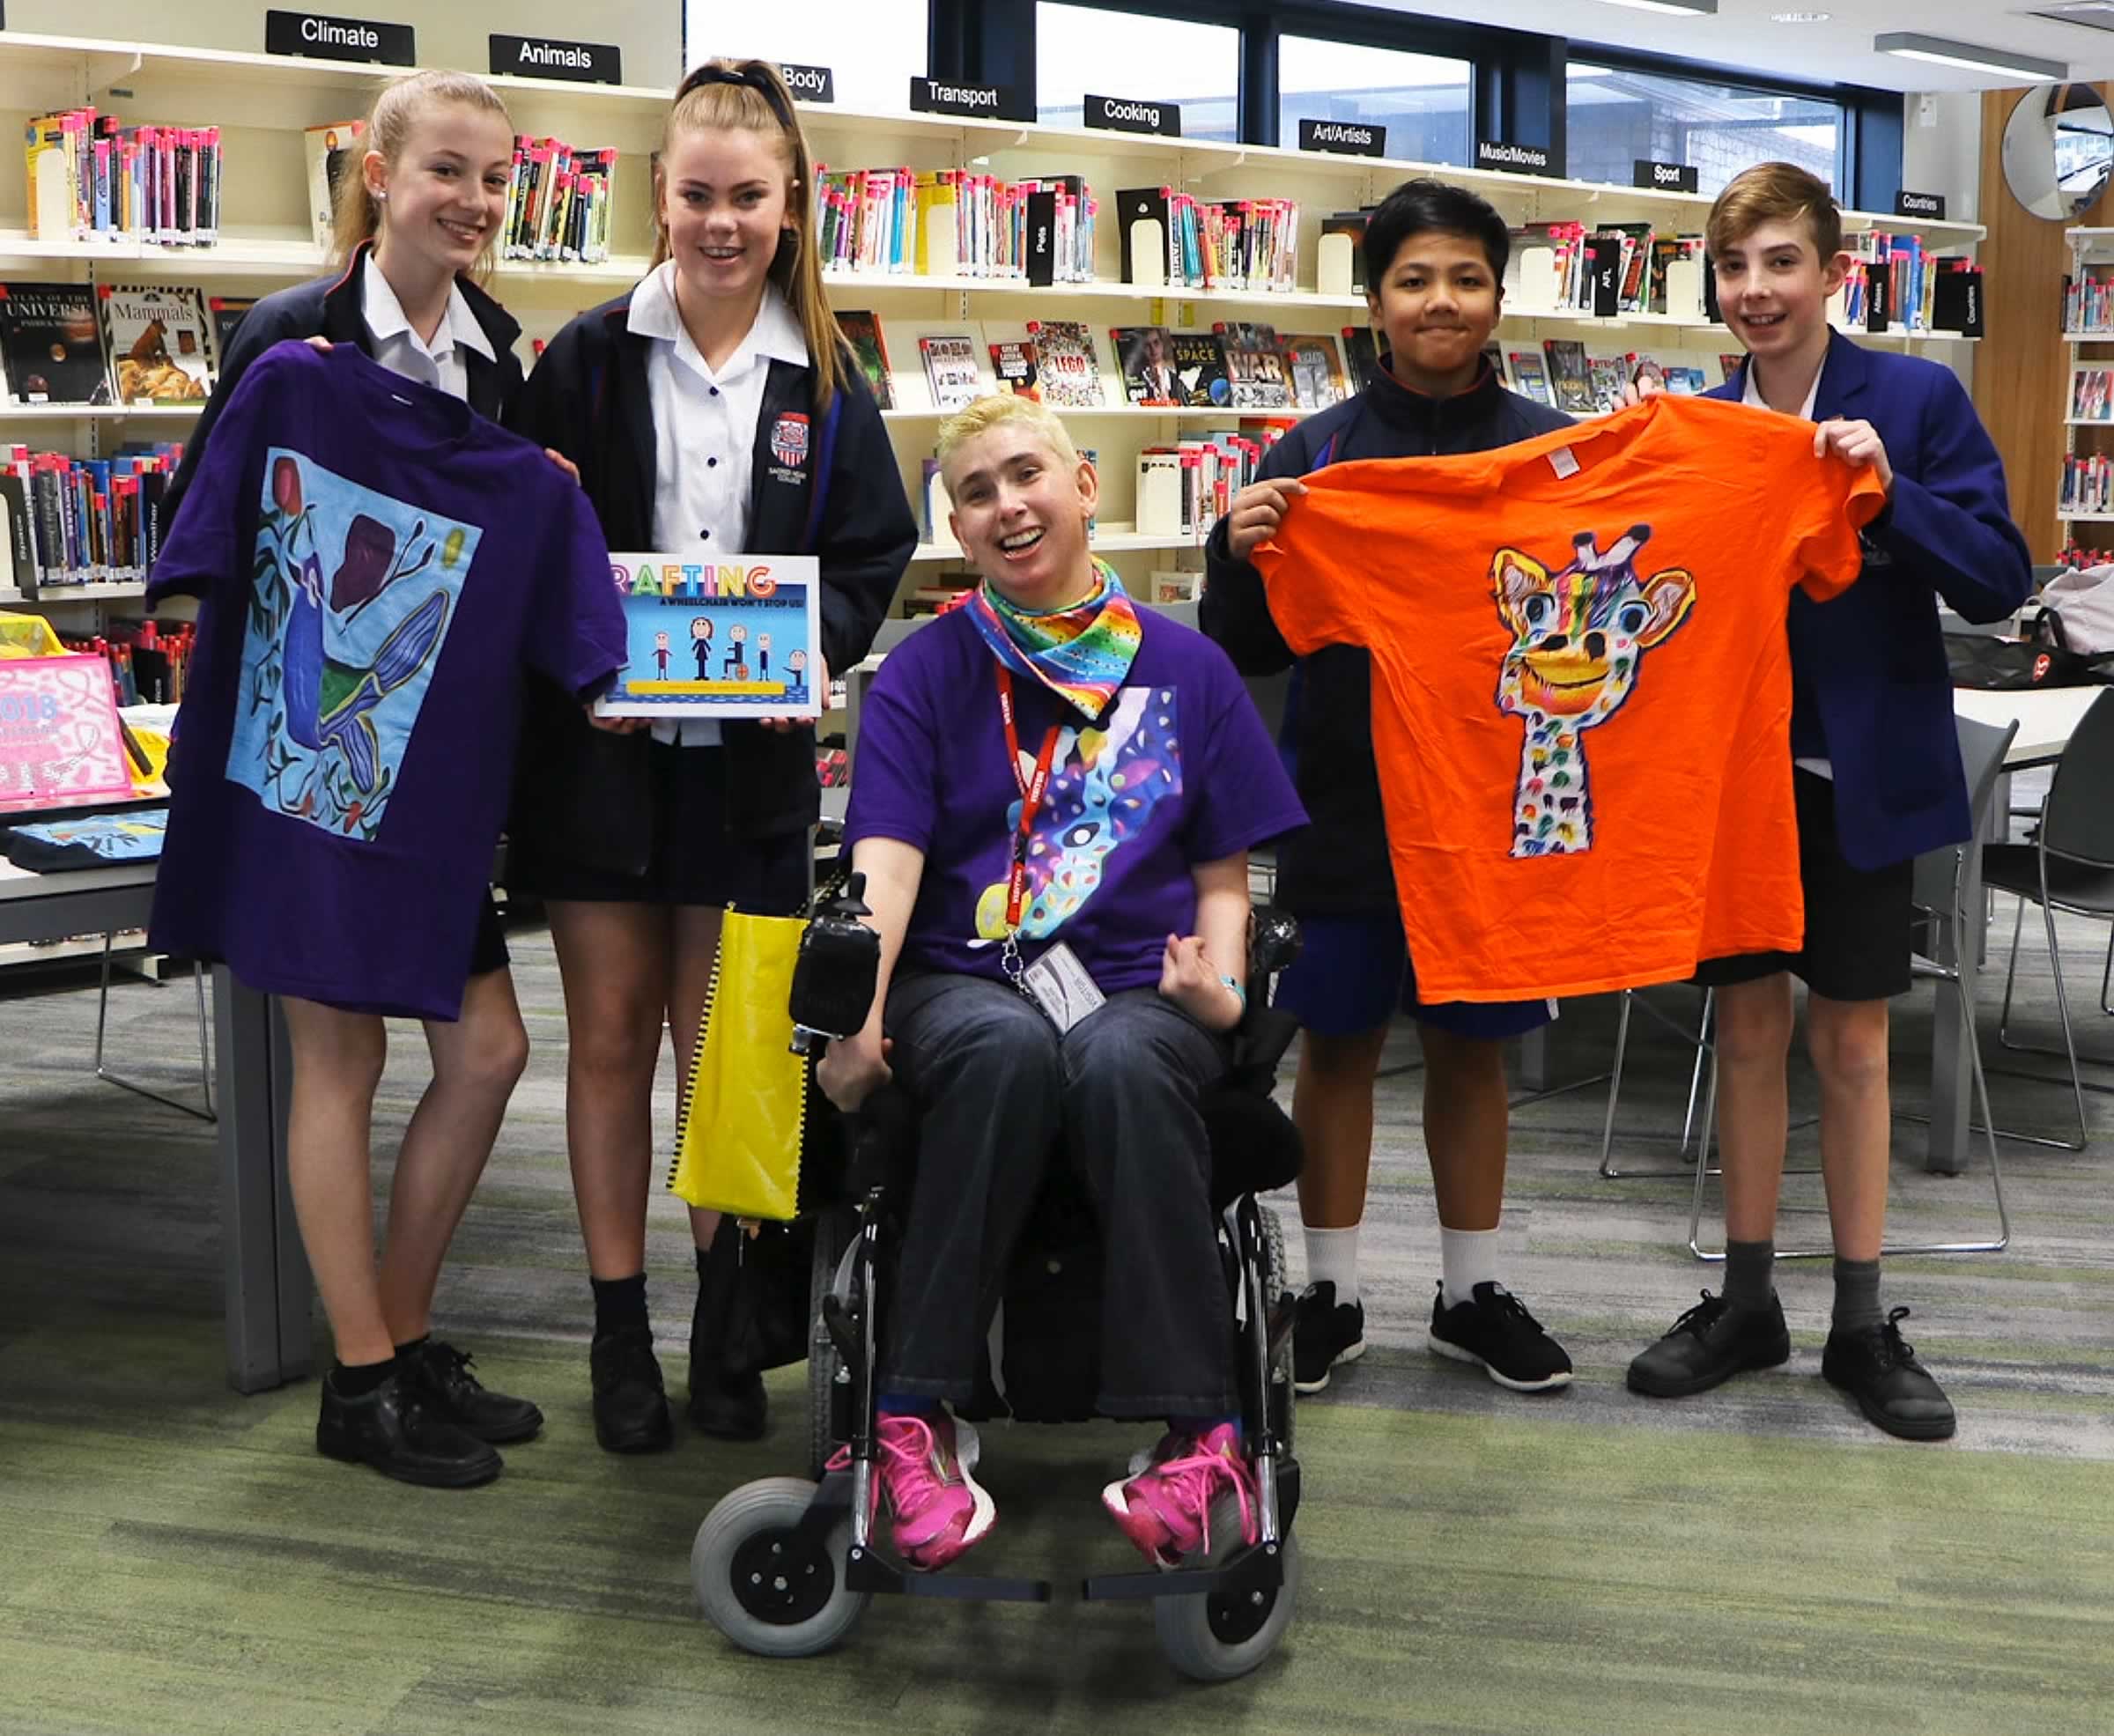 Photo of Janelle McMillan with four school children holding some of her t-shirts and books, with bookshelves behind them — all smiling.